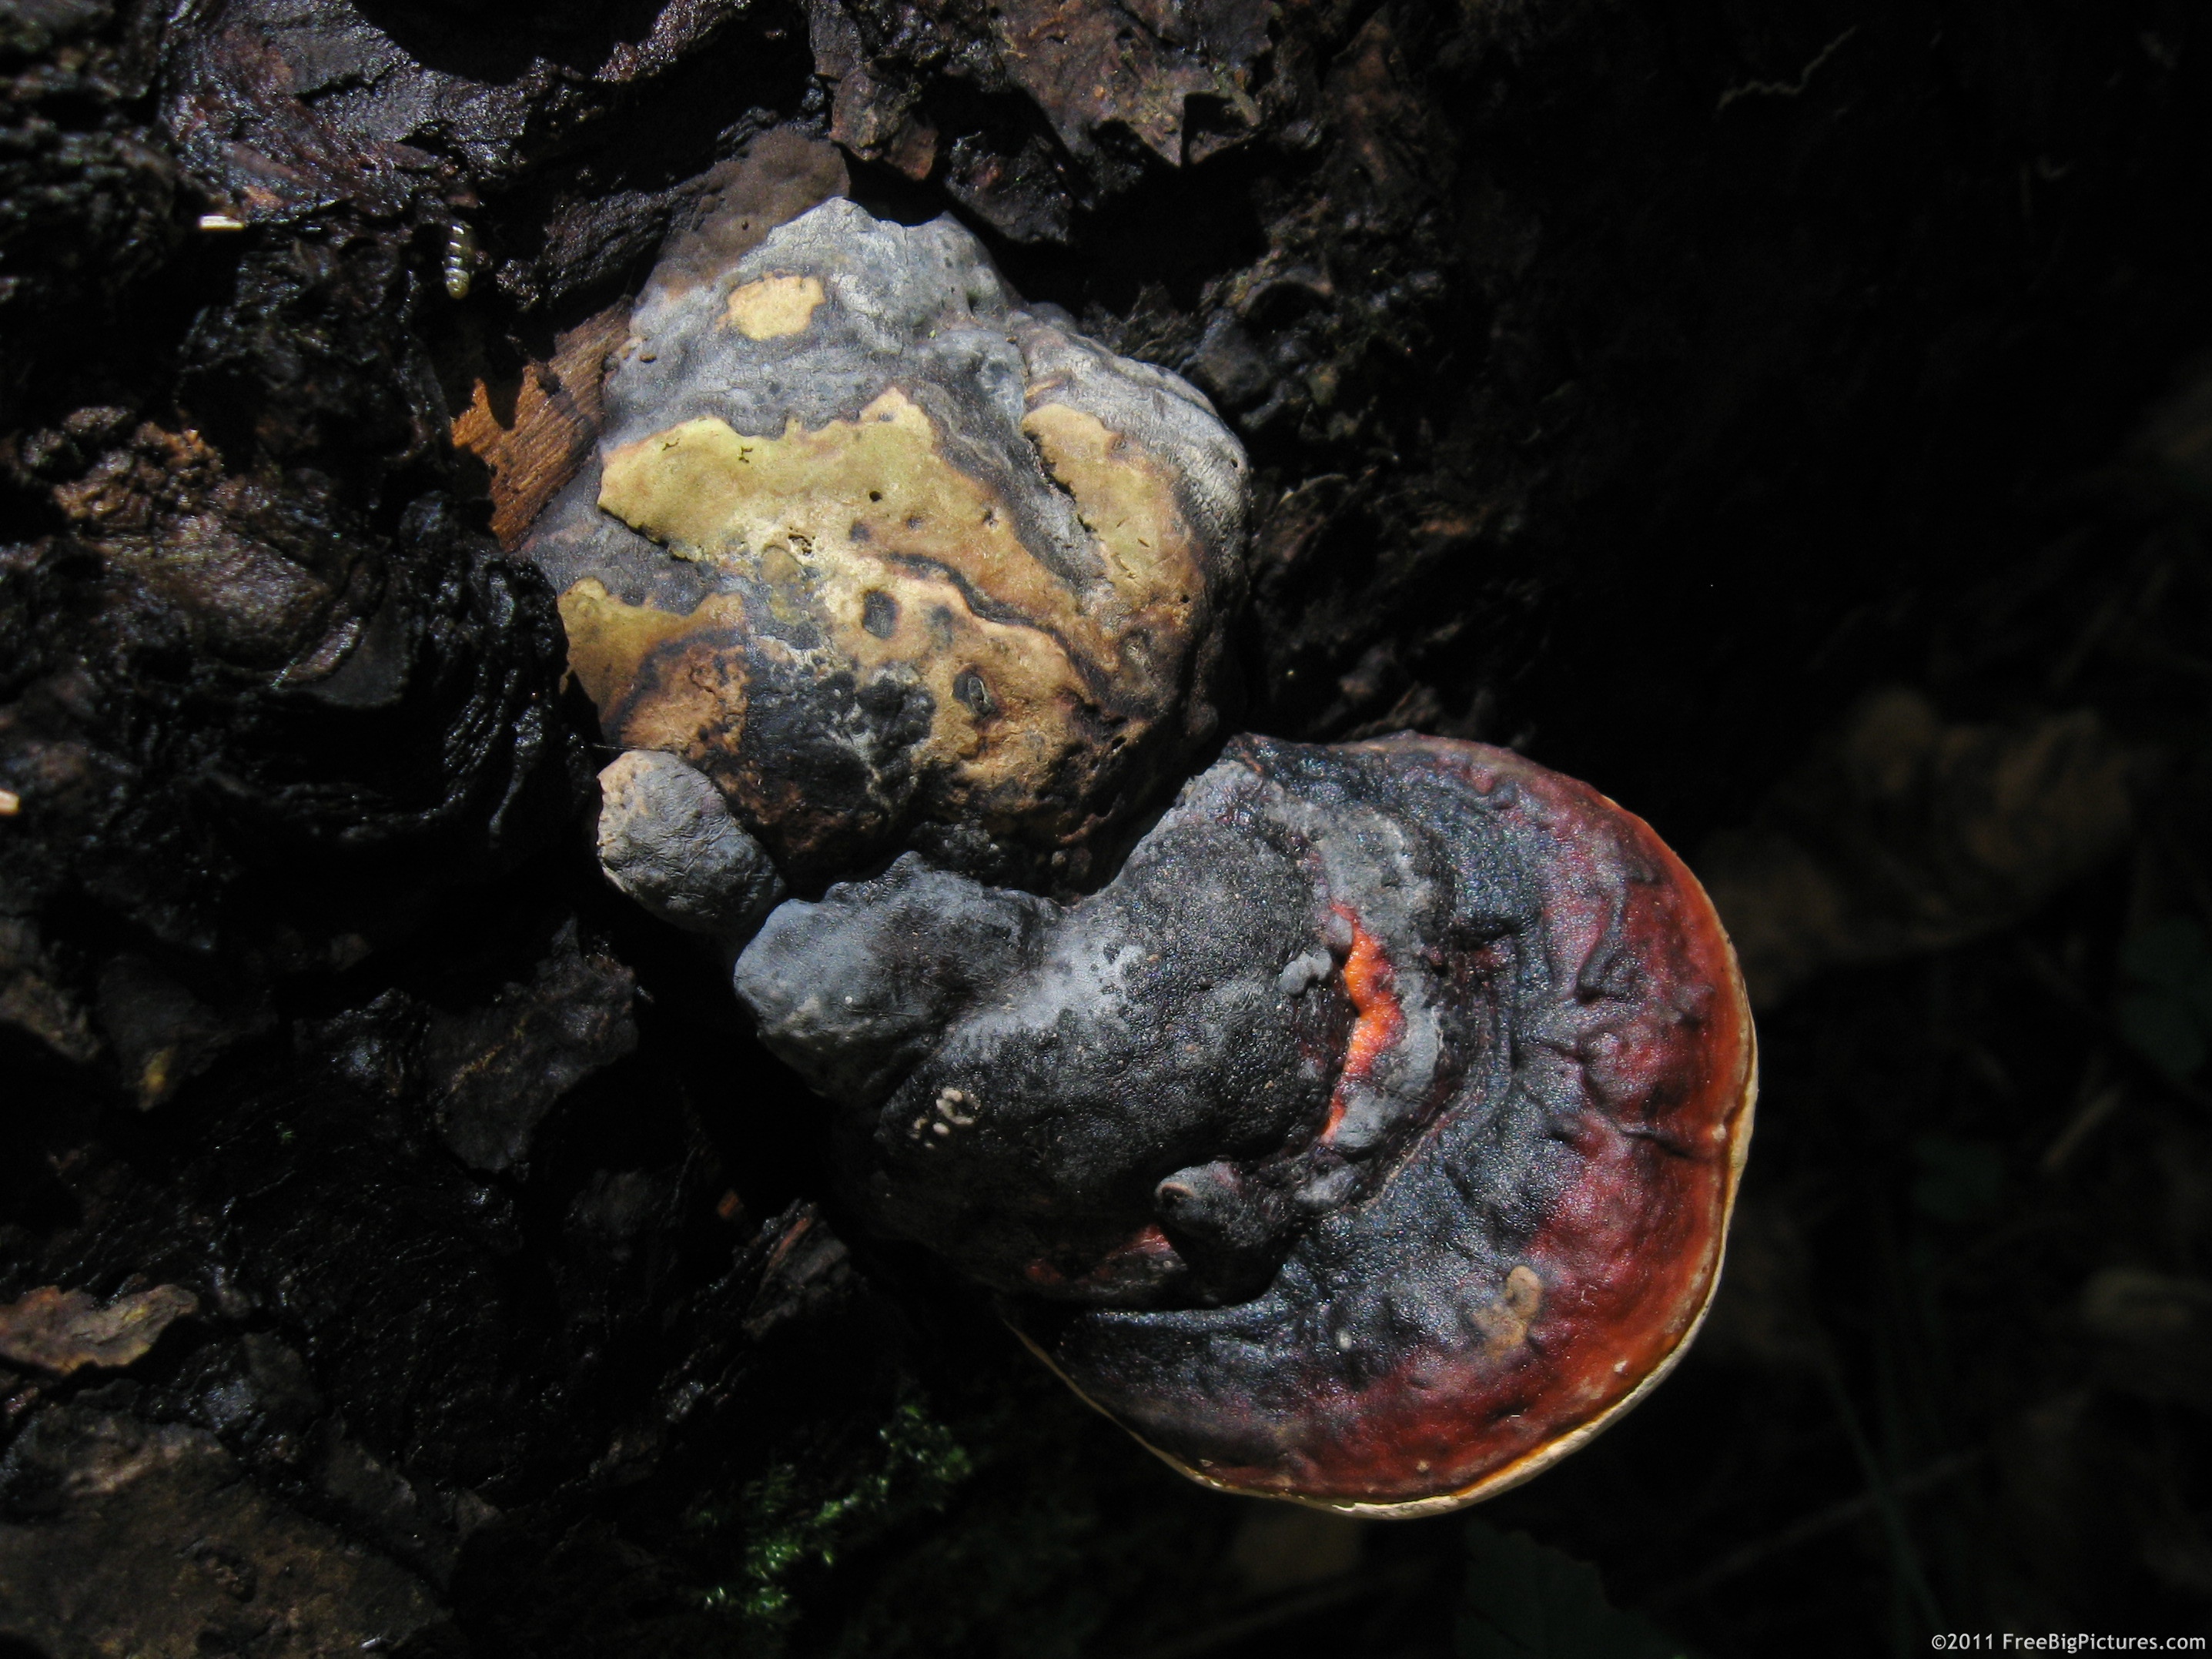 Fomitopsis pinicola - a mushroom that grows usually in coniferous forest